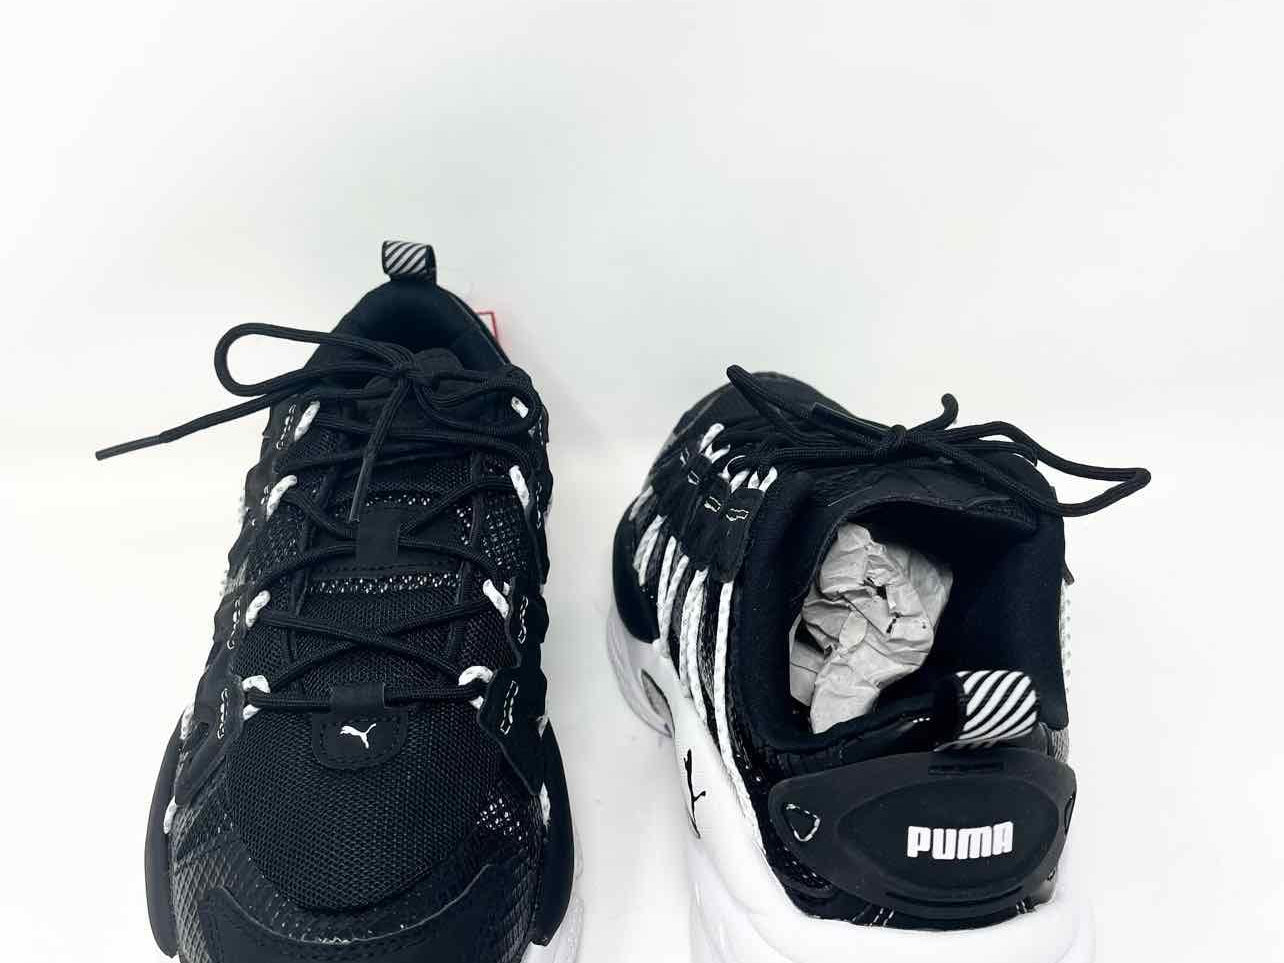 Puma Men's LQD Cell Omega Black/White Lace-up Shoe Size 8 Sneakers - Article Consignment